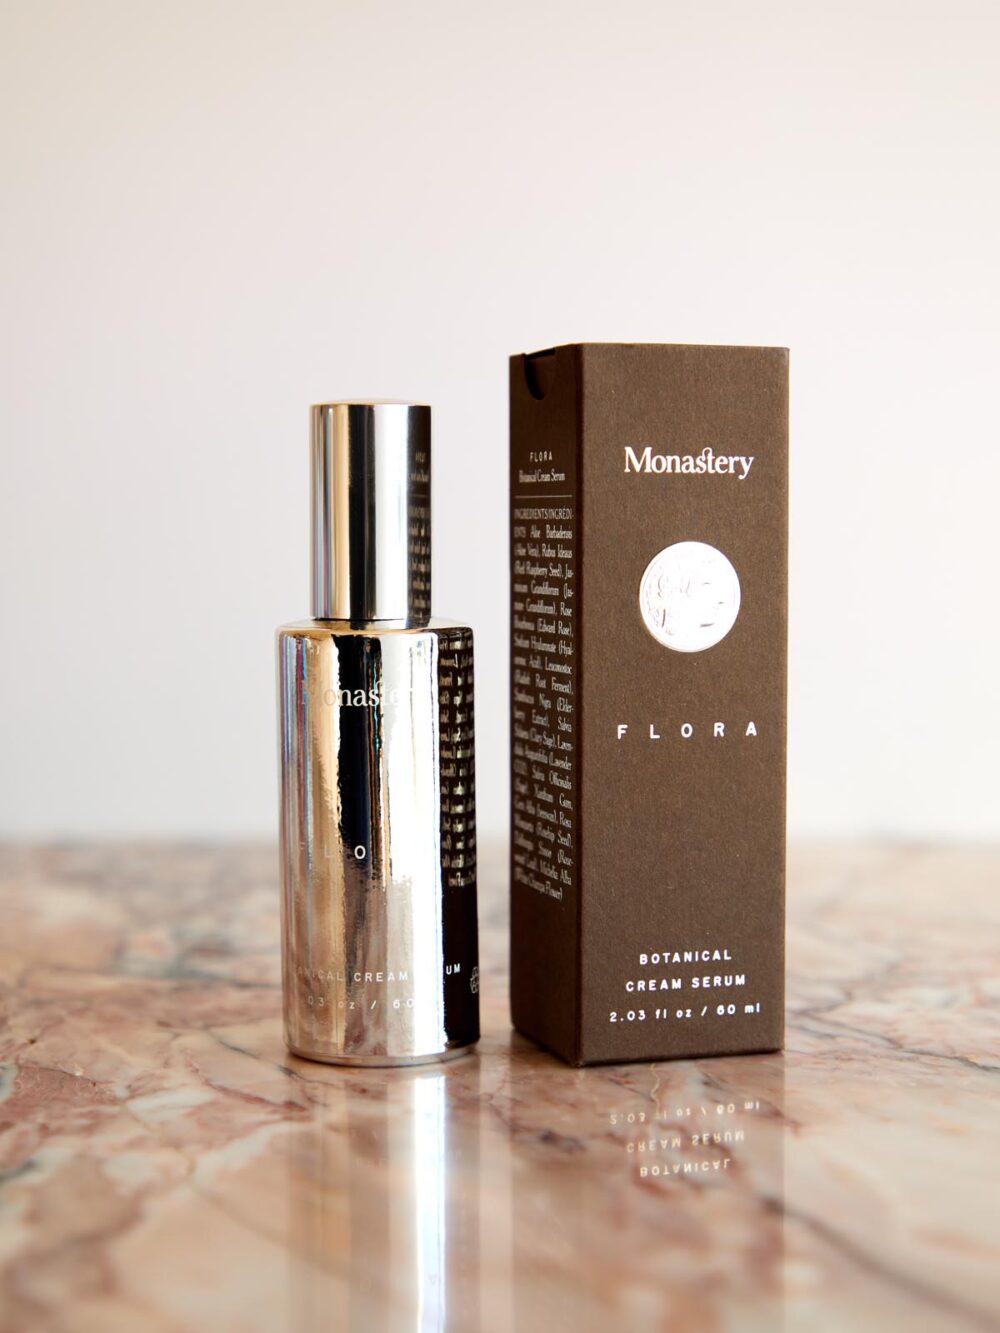 Flora Botanical Cream Serum and box on pink marble by Monastery Made